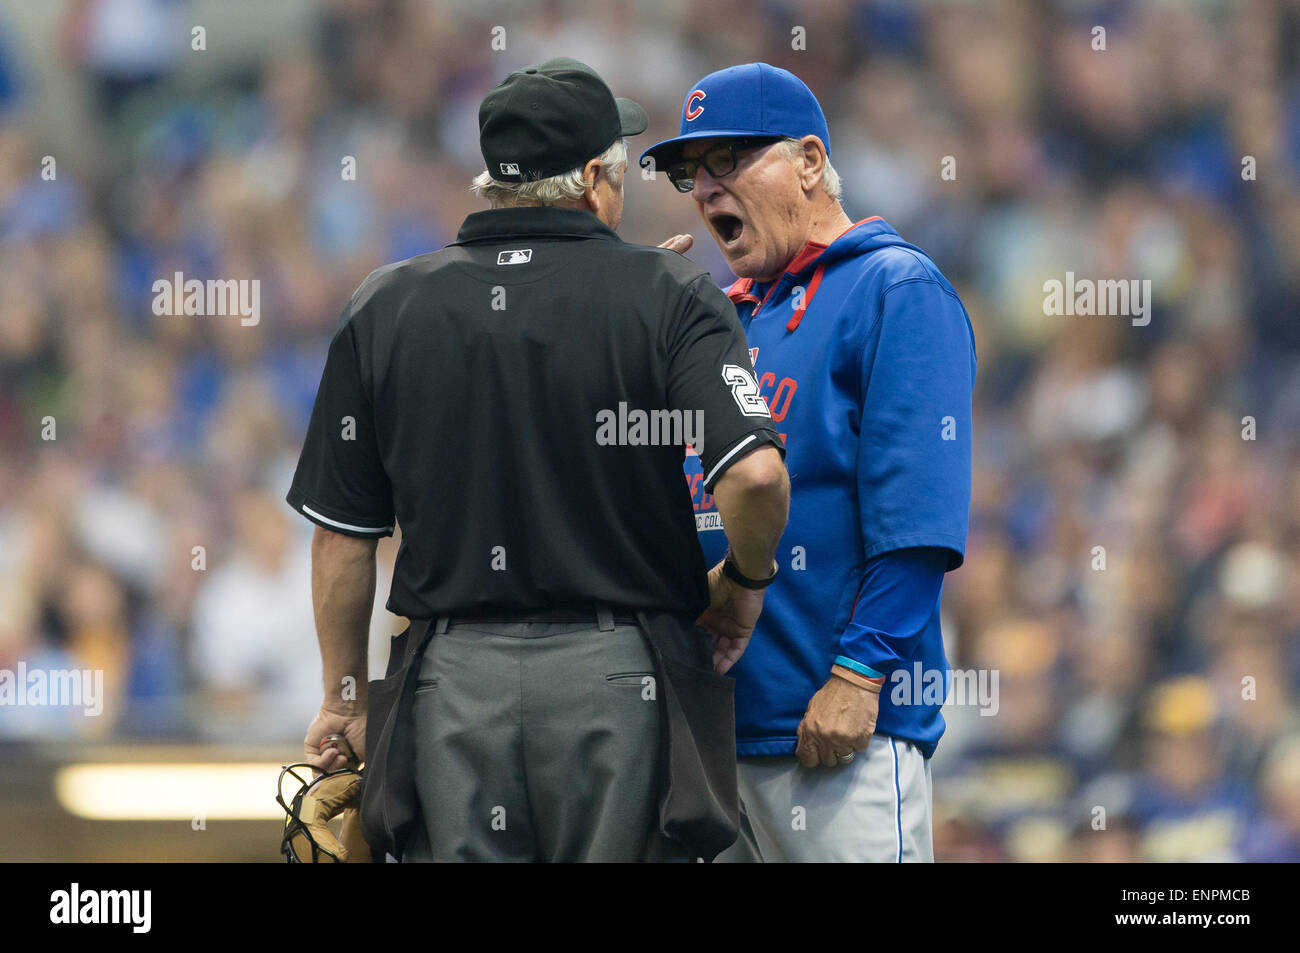 Milwaukee, WI, USA. 9th May, 2015. Chicago Cubs manager Joe Maddon #70 talks with home plate umpire Tom Hallion about a ball that was called trapped at the bottom of the outfield fence during the Major League Baseball game between the Milwaukee Brewers and the Chicago Cubs at Miller Park in Milwaukee, WI. John Fisher/CSM/Alamy Live News Stock Photo